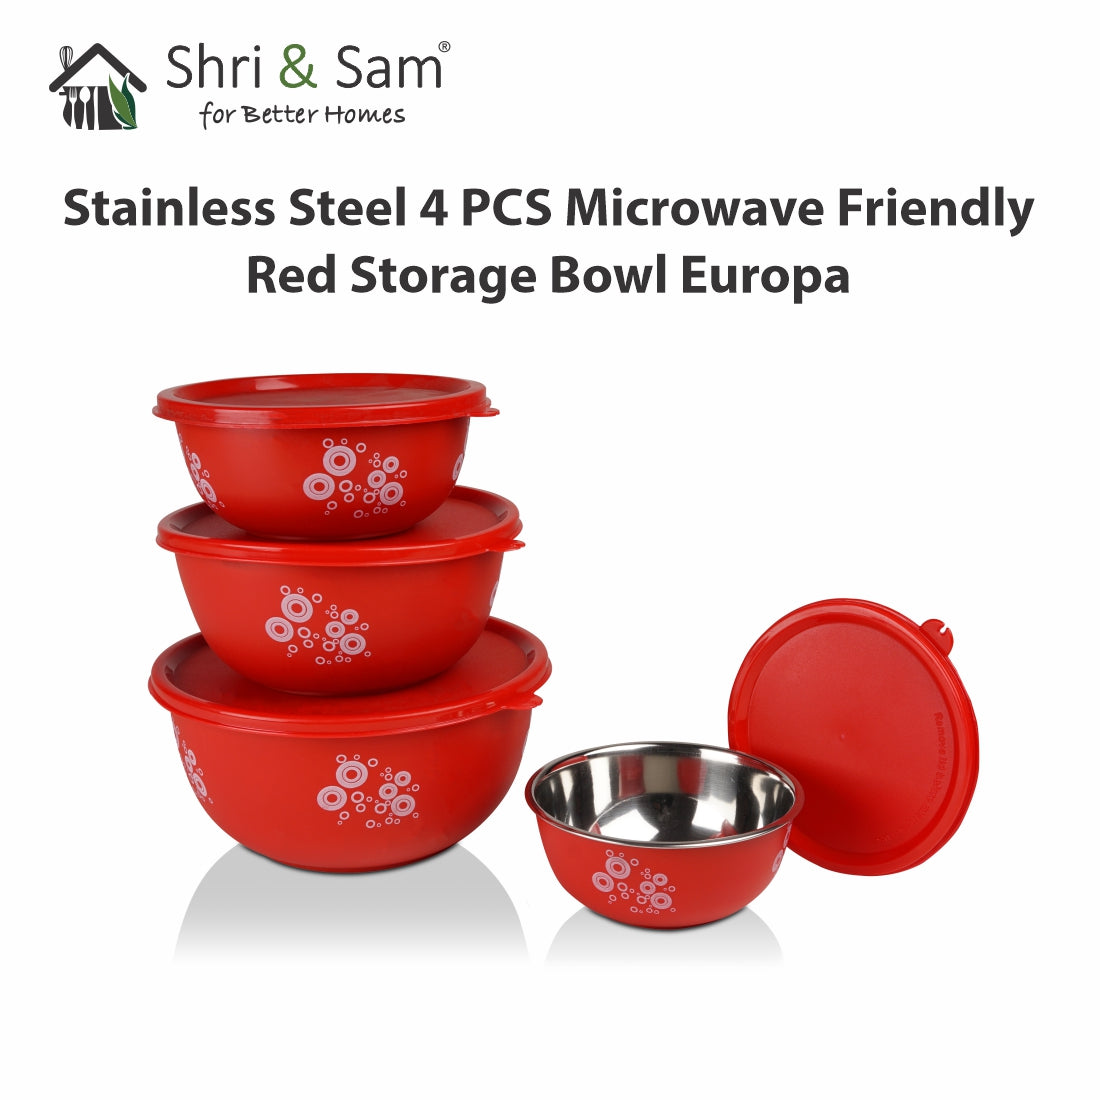 Stainless Steel 4 PCS Microwave Friendly Red Storage Bowl Europa